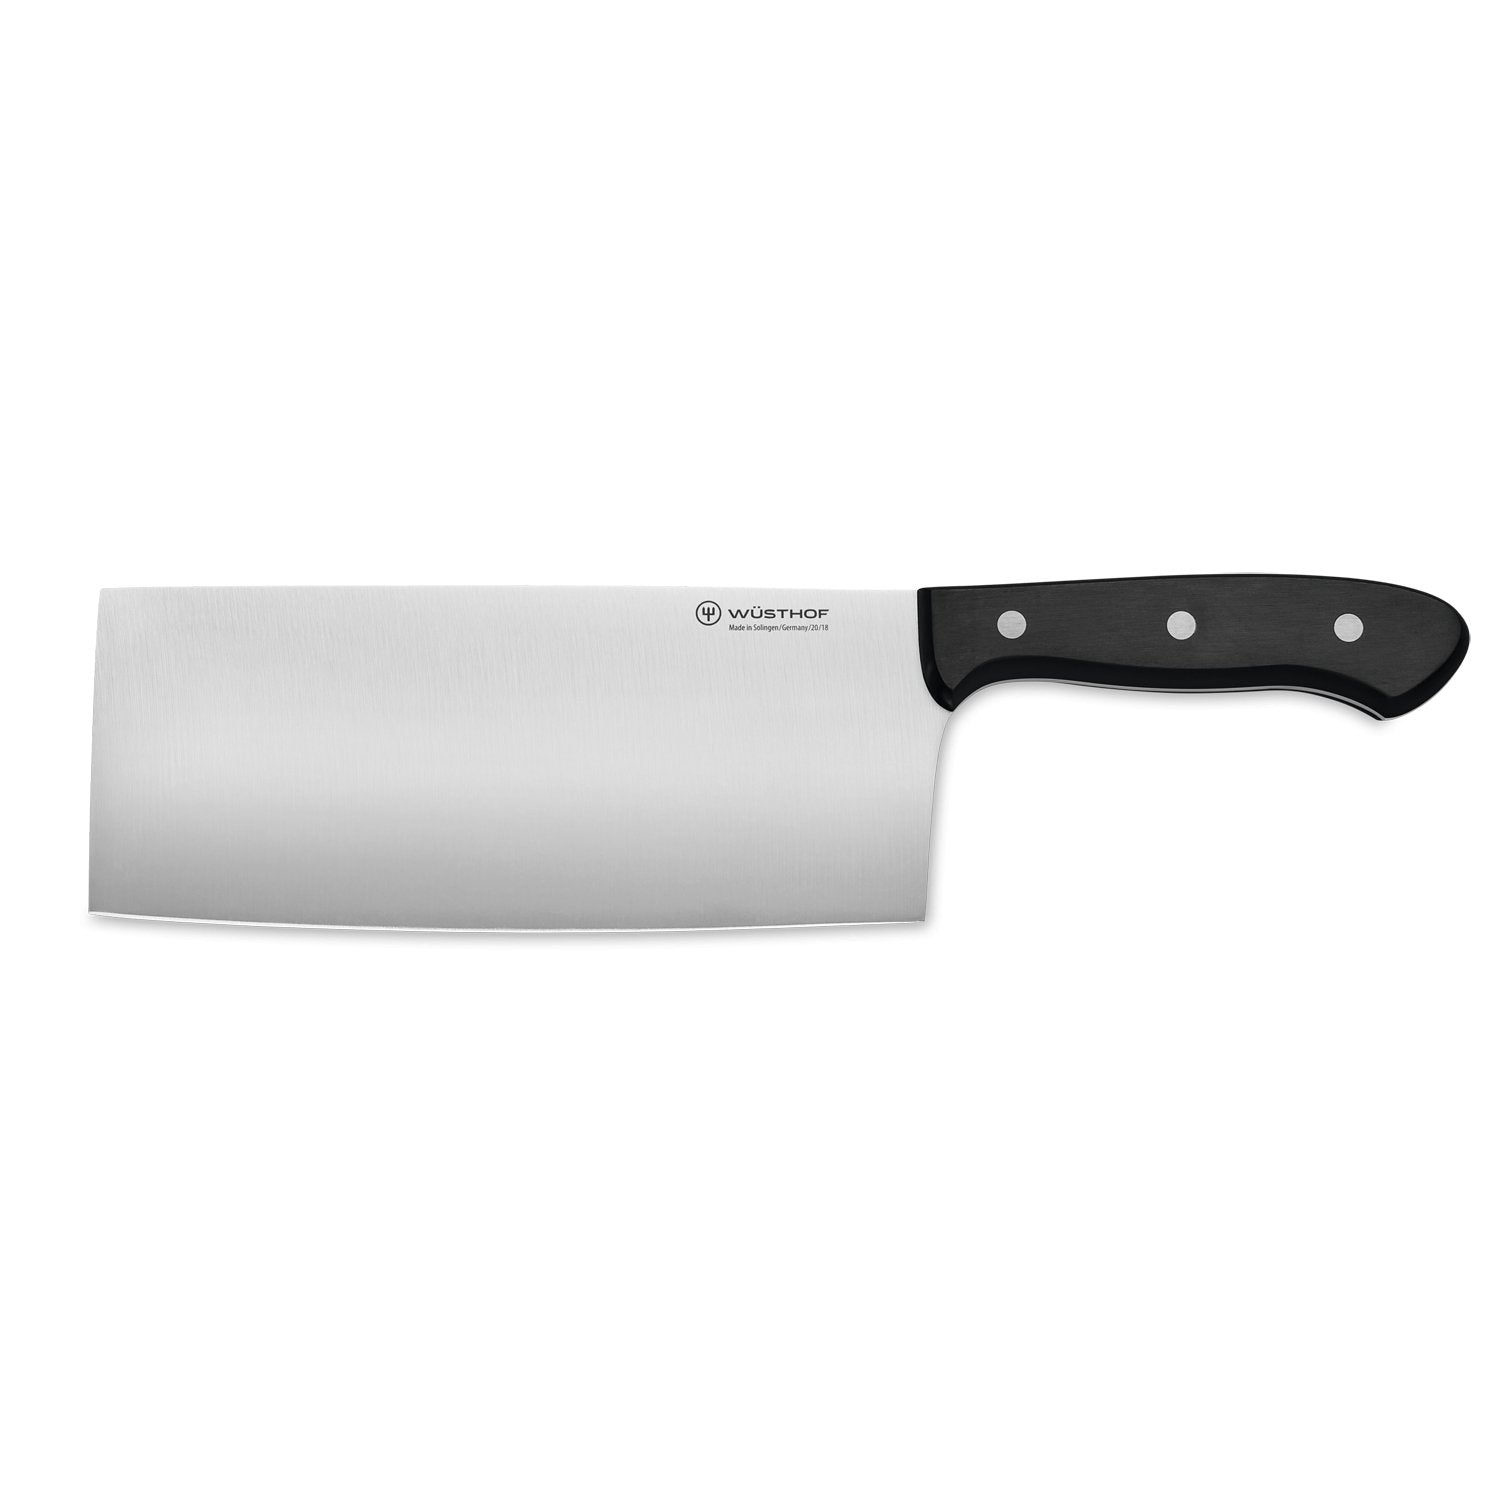 WÜSTHOF Gourmet Chinese chef's knife, 4691/18  Advantageously shopping at